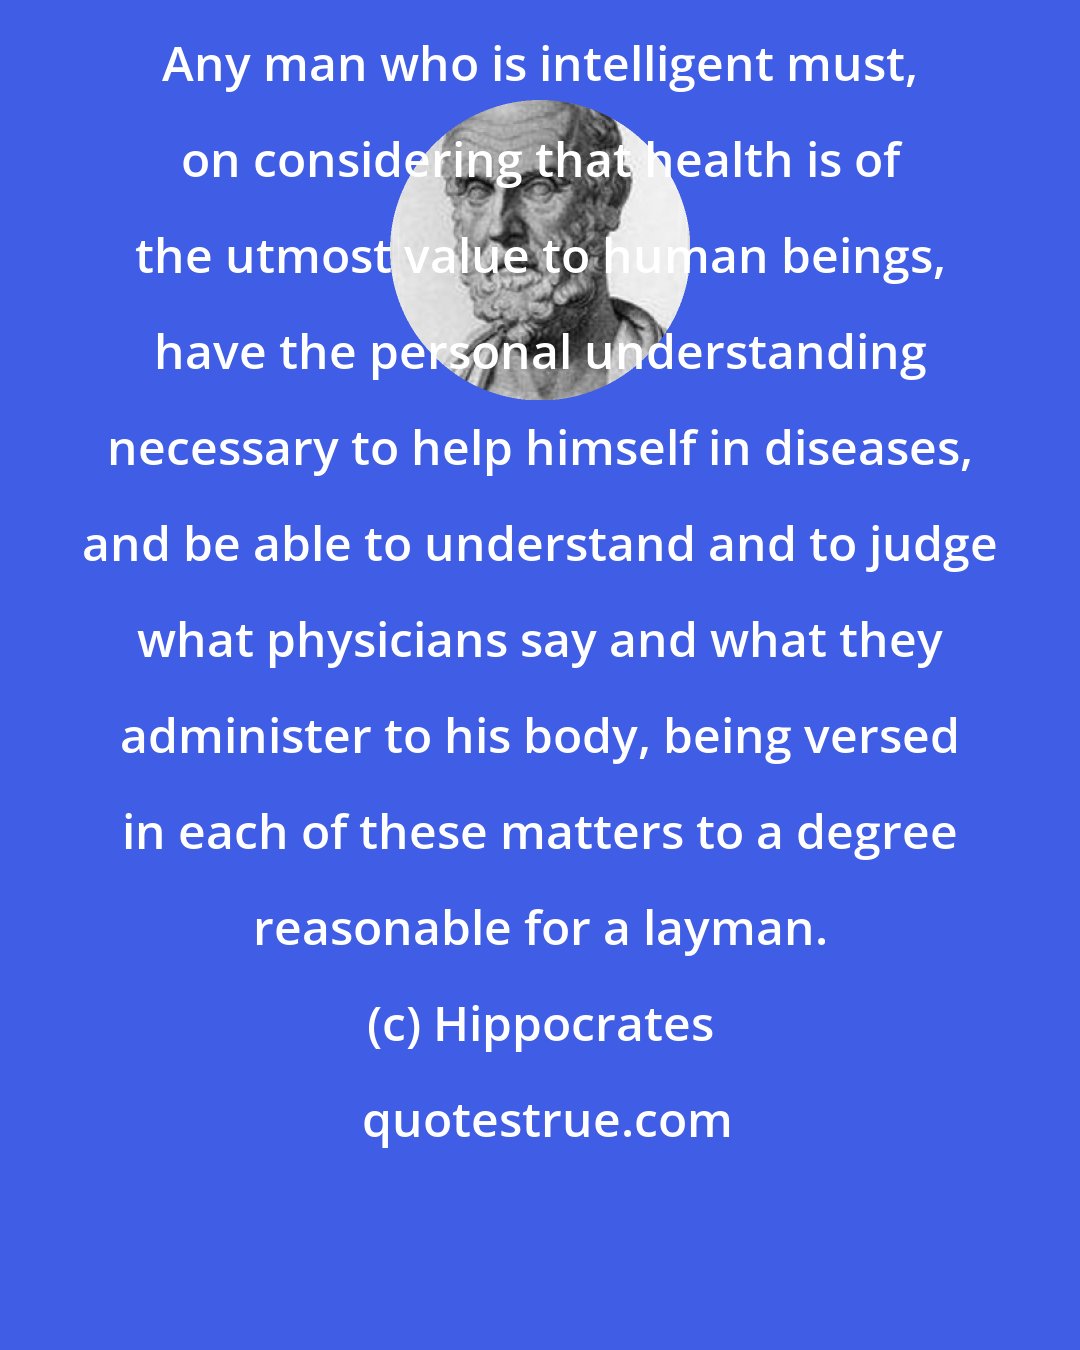 Hippocrates: Any man who is intelligent must, on considering that health is of the utmost value to human beings, have the personal understanding necessary to help himself in diseases, and be able to understand and to judge what physicians say and what they administer to his body, being versed in each of these matters to a degree reasonable for a layman.